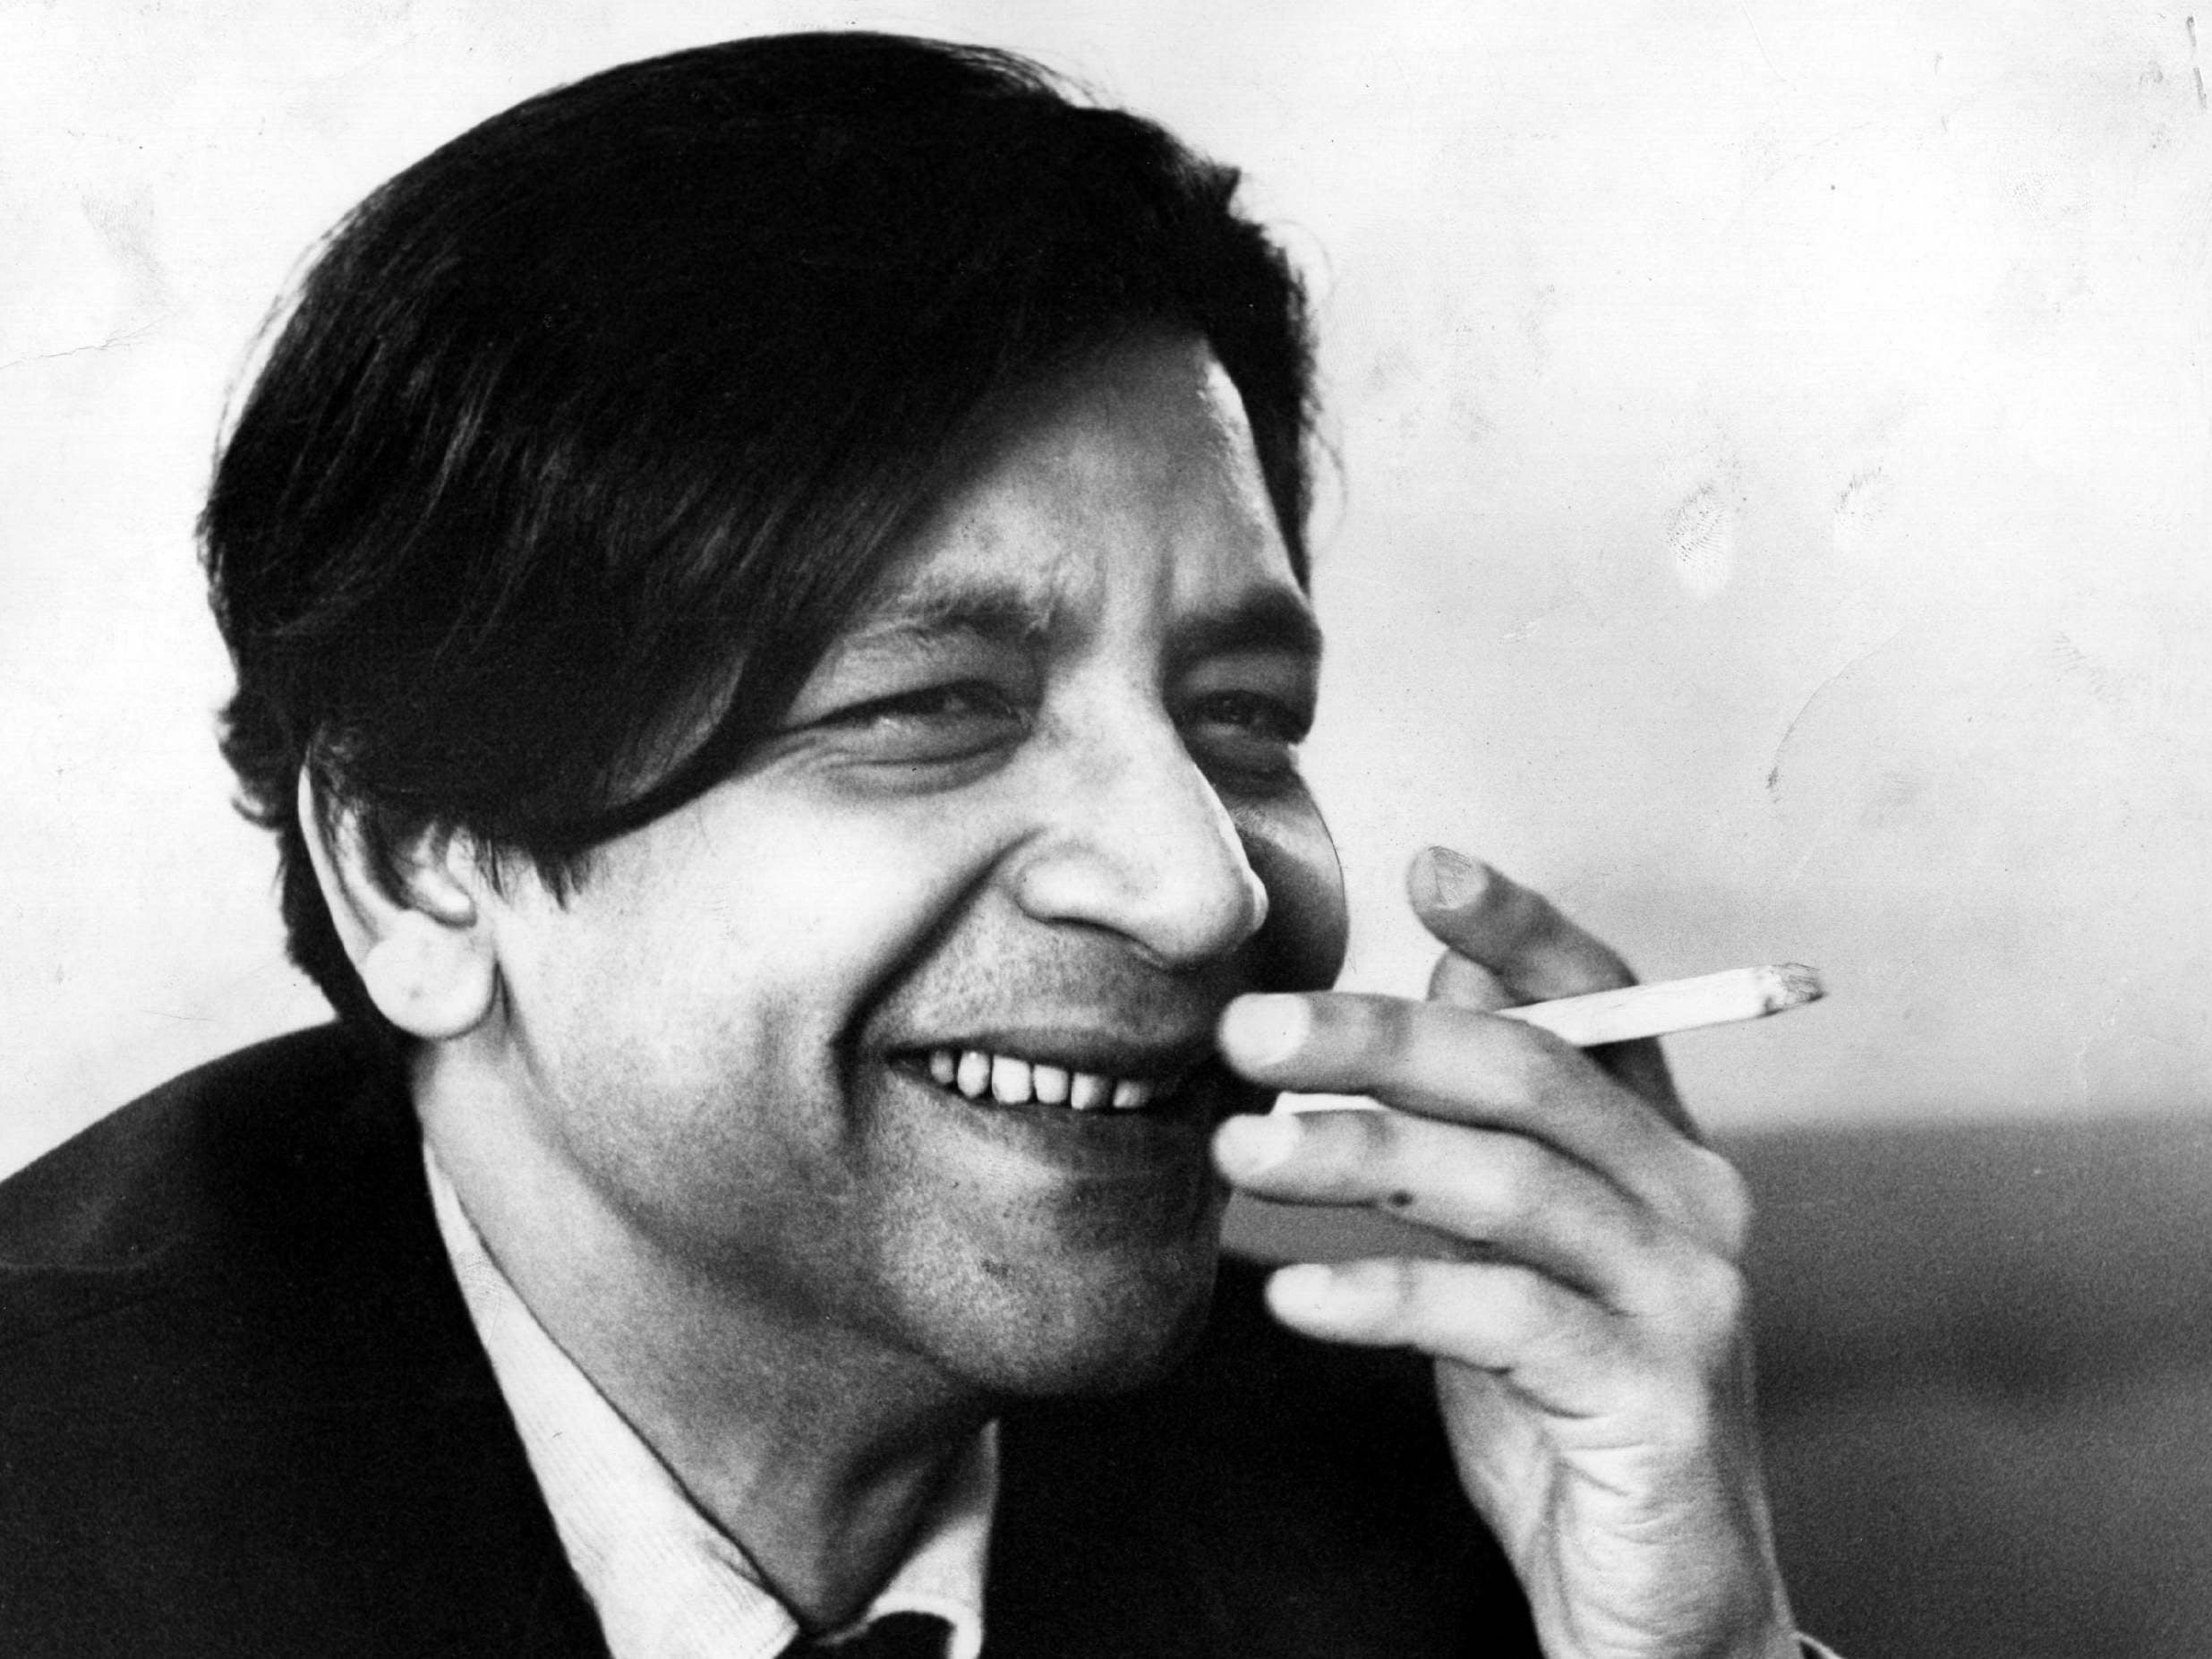 For Vidia Naipaul, the craft of writing was shrouded in mystery